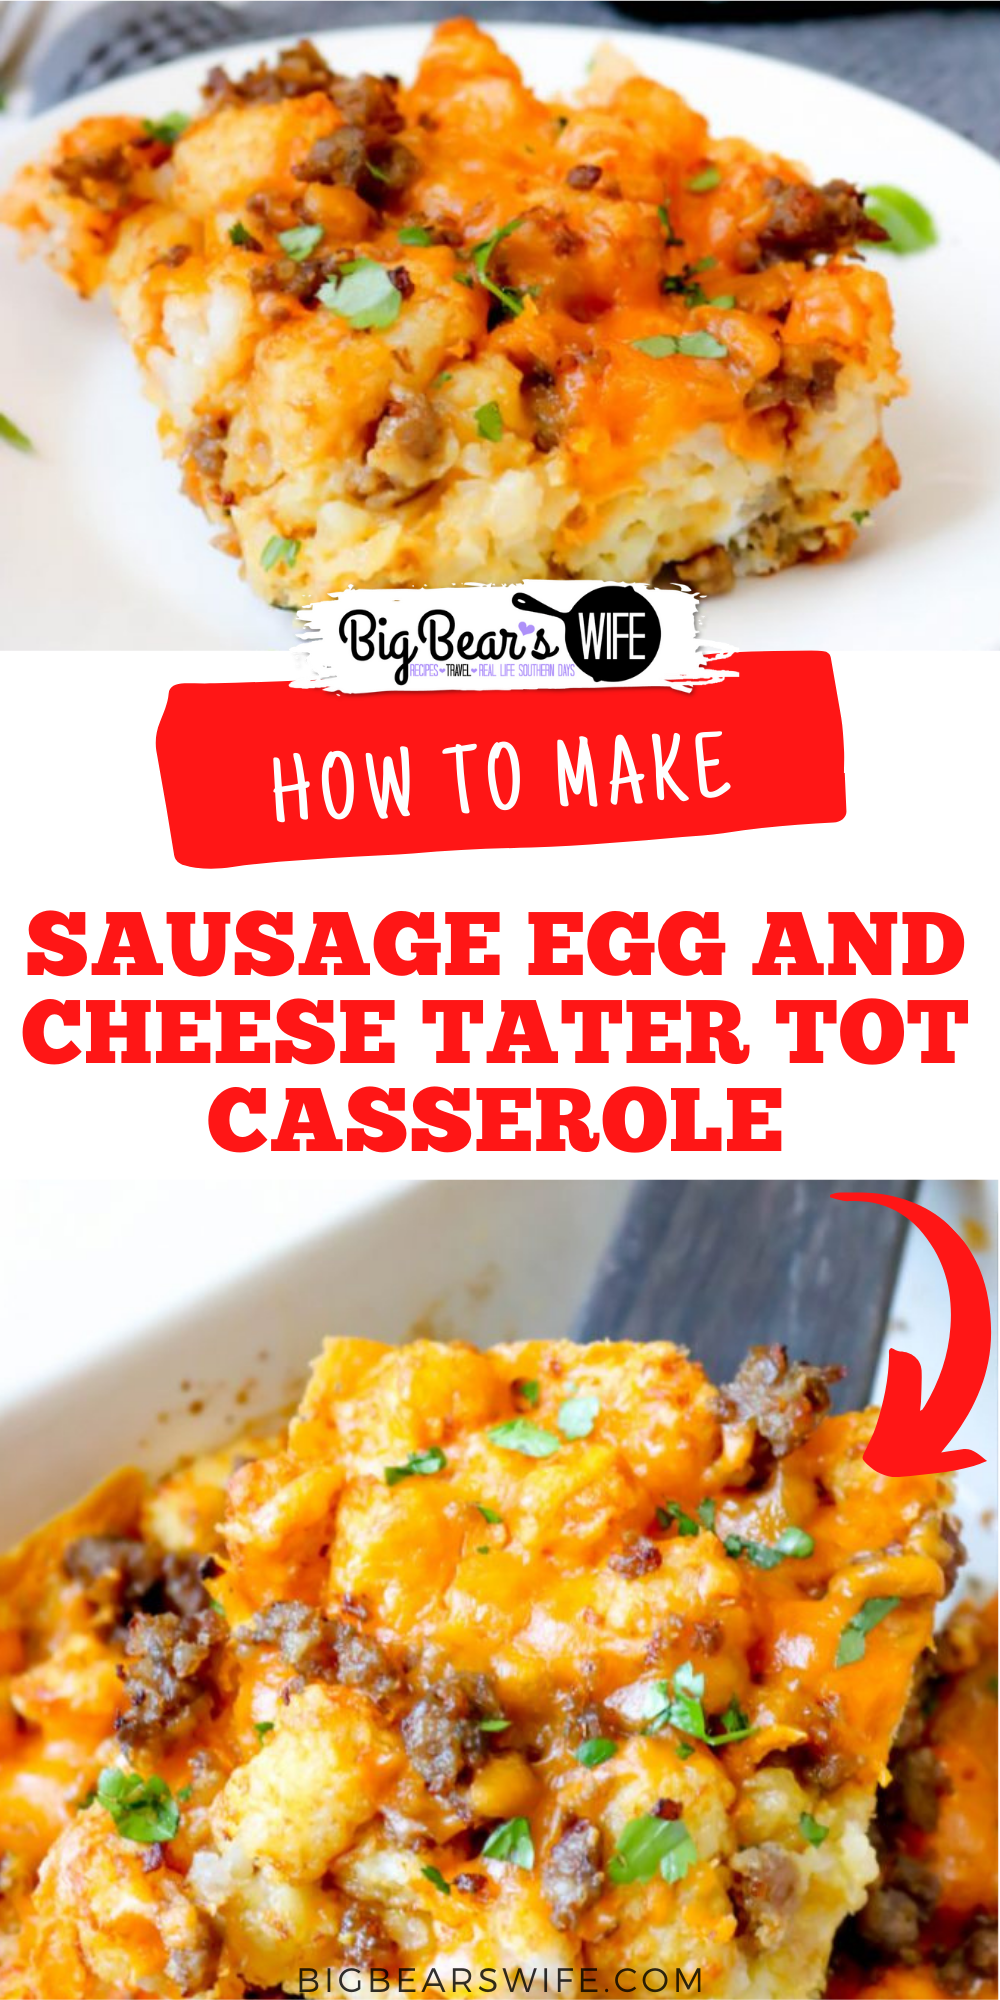 A breakfast casserole that’s perfect any morning or even great made the night before! This Sausage Egg and Cheese Tater Tot Casserole is packed with all of your breakfast favorites! 

 via @bigbearswife